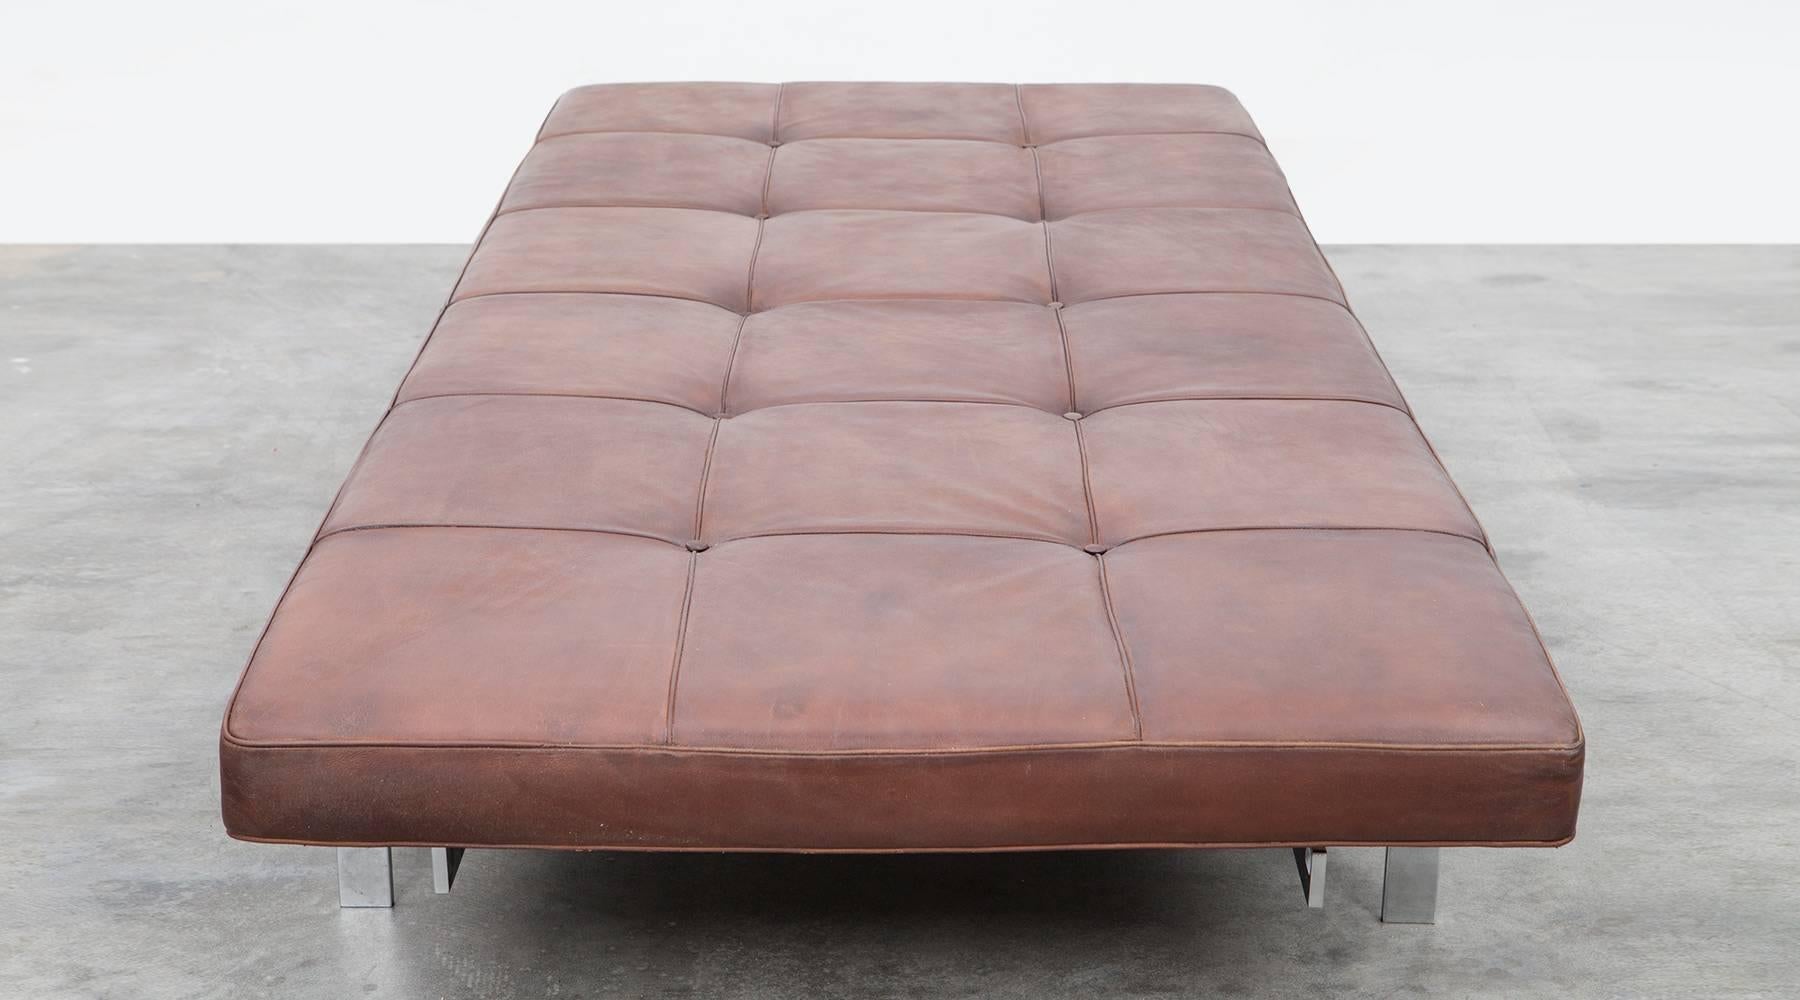 1950s Brown Leather and Steel Base Daybed by Poul Kjaerholm In Good Condition For Sale In Frankfurt, Hessen, DE